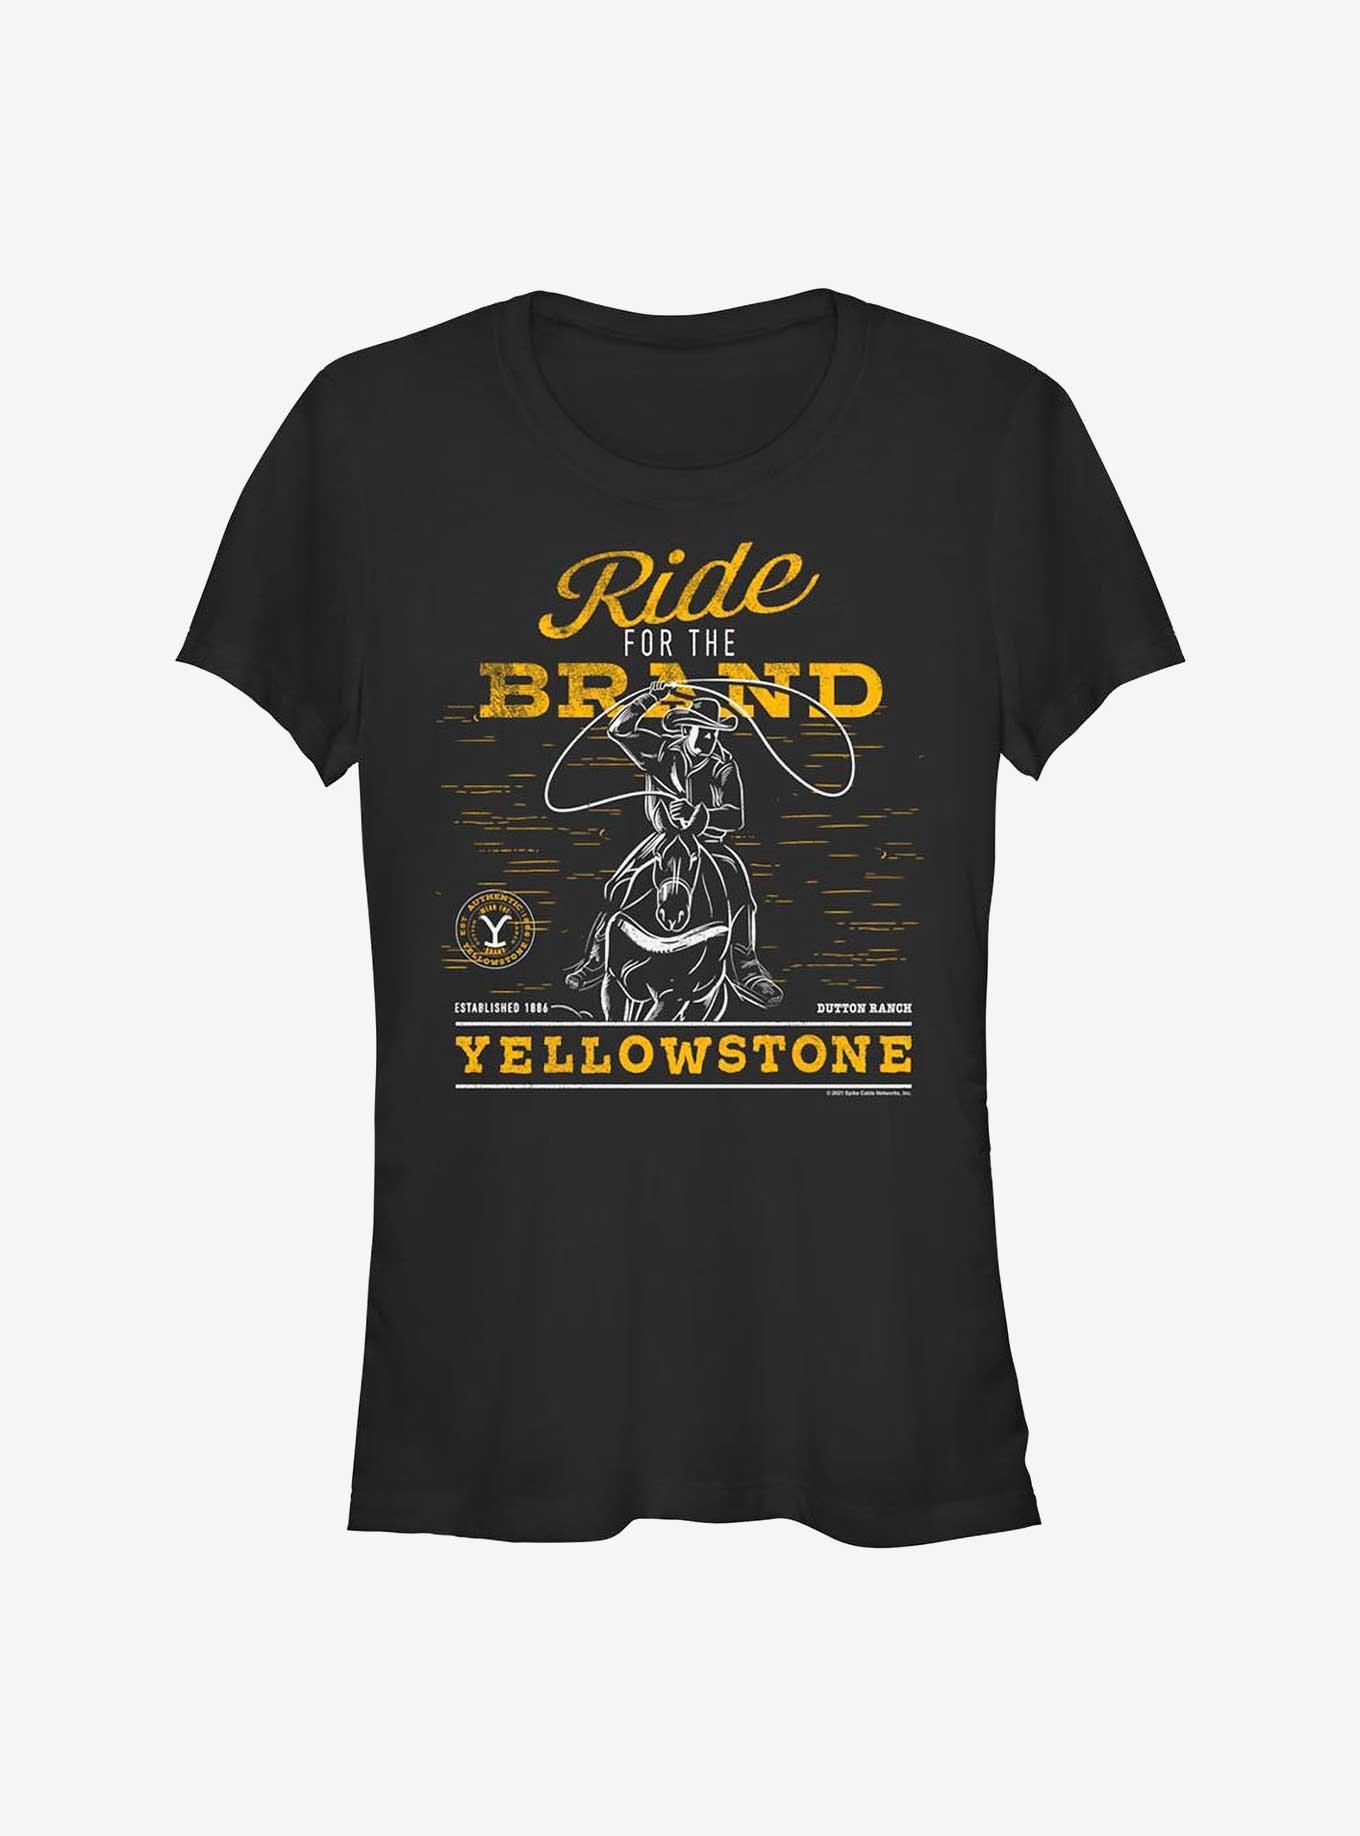 Yellowstone Ride For The Brand Girls T-Shirt, BLACK, hi-res